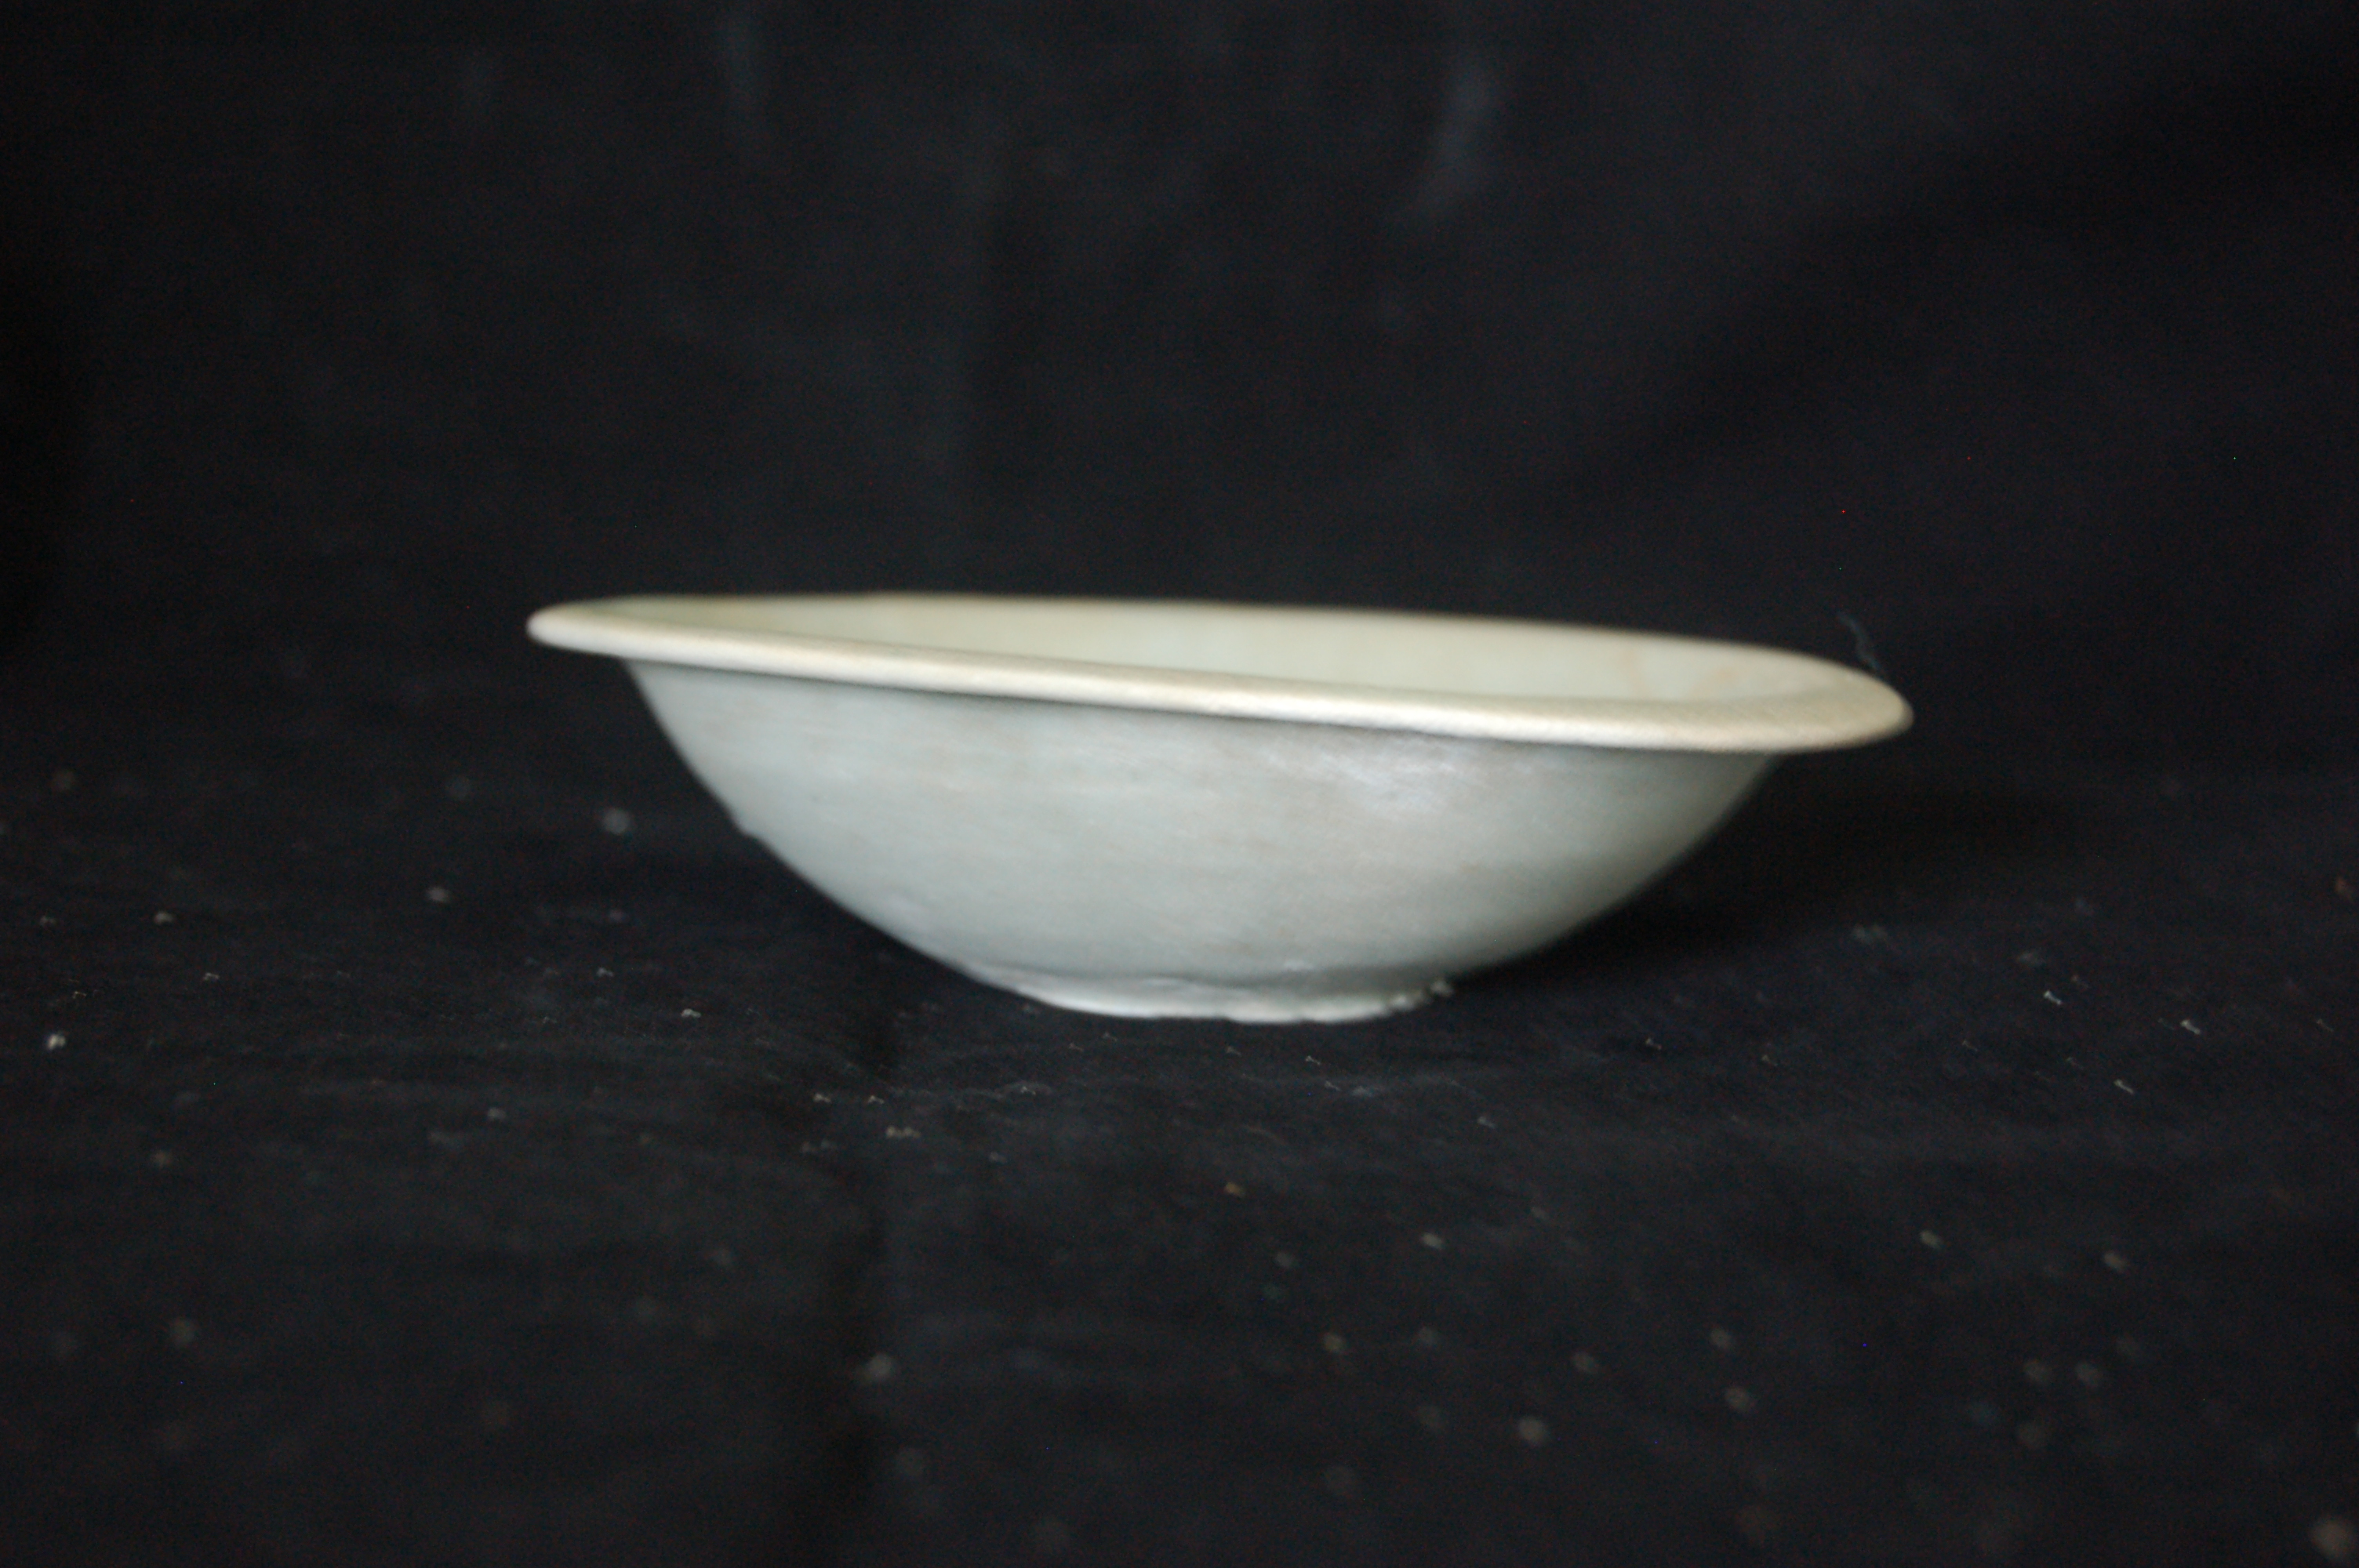 Small shallow bowl flattened everted rim, lightly incised ring in the well, a rounded wall and a flat base. Diameter 11 cm, height 2.5 cm.